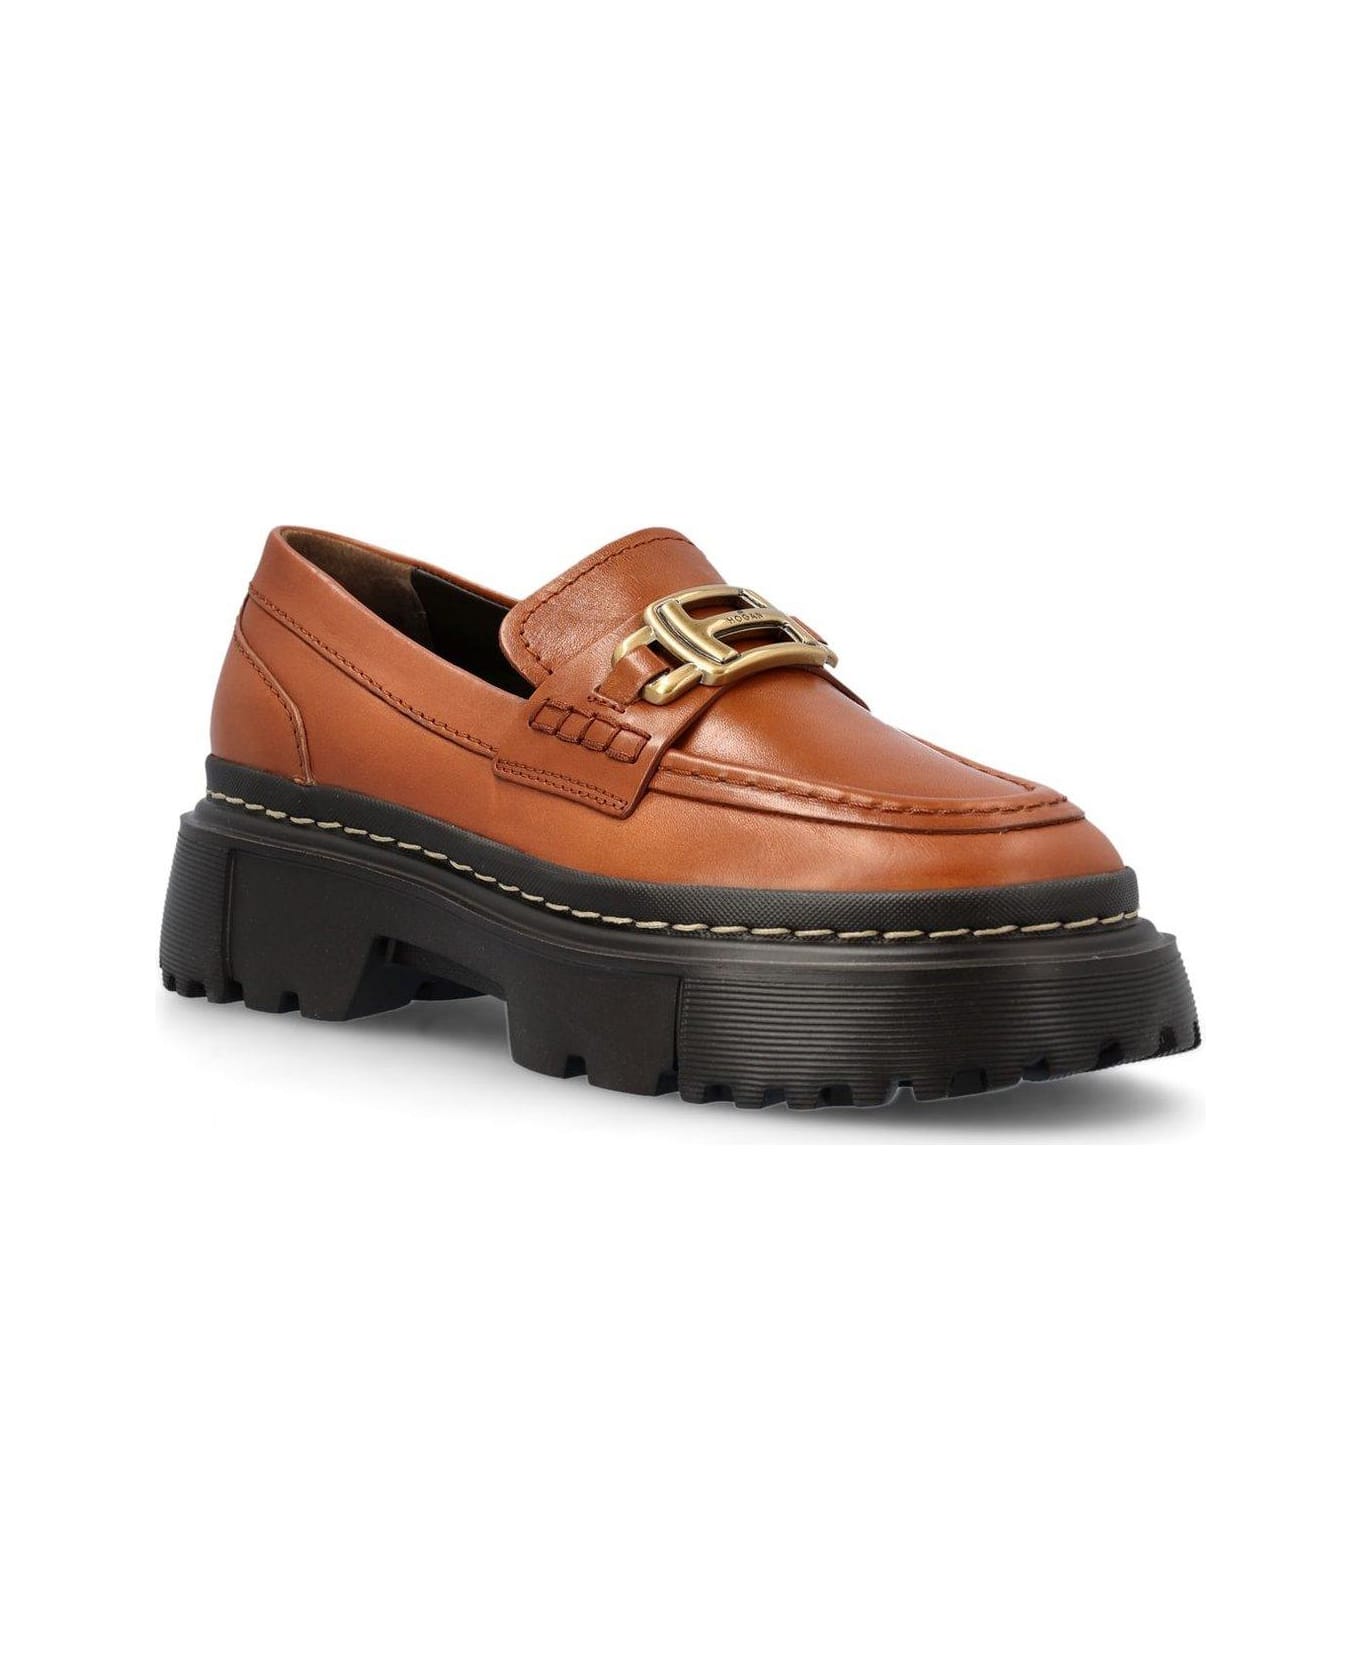 Hogan H619 Slip-on Loafers - CUOIO